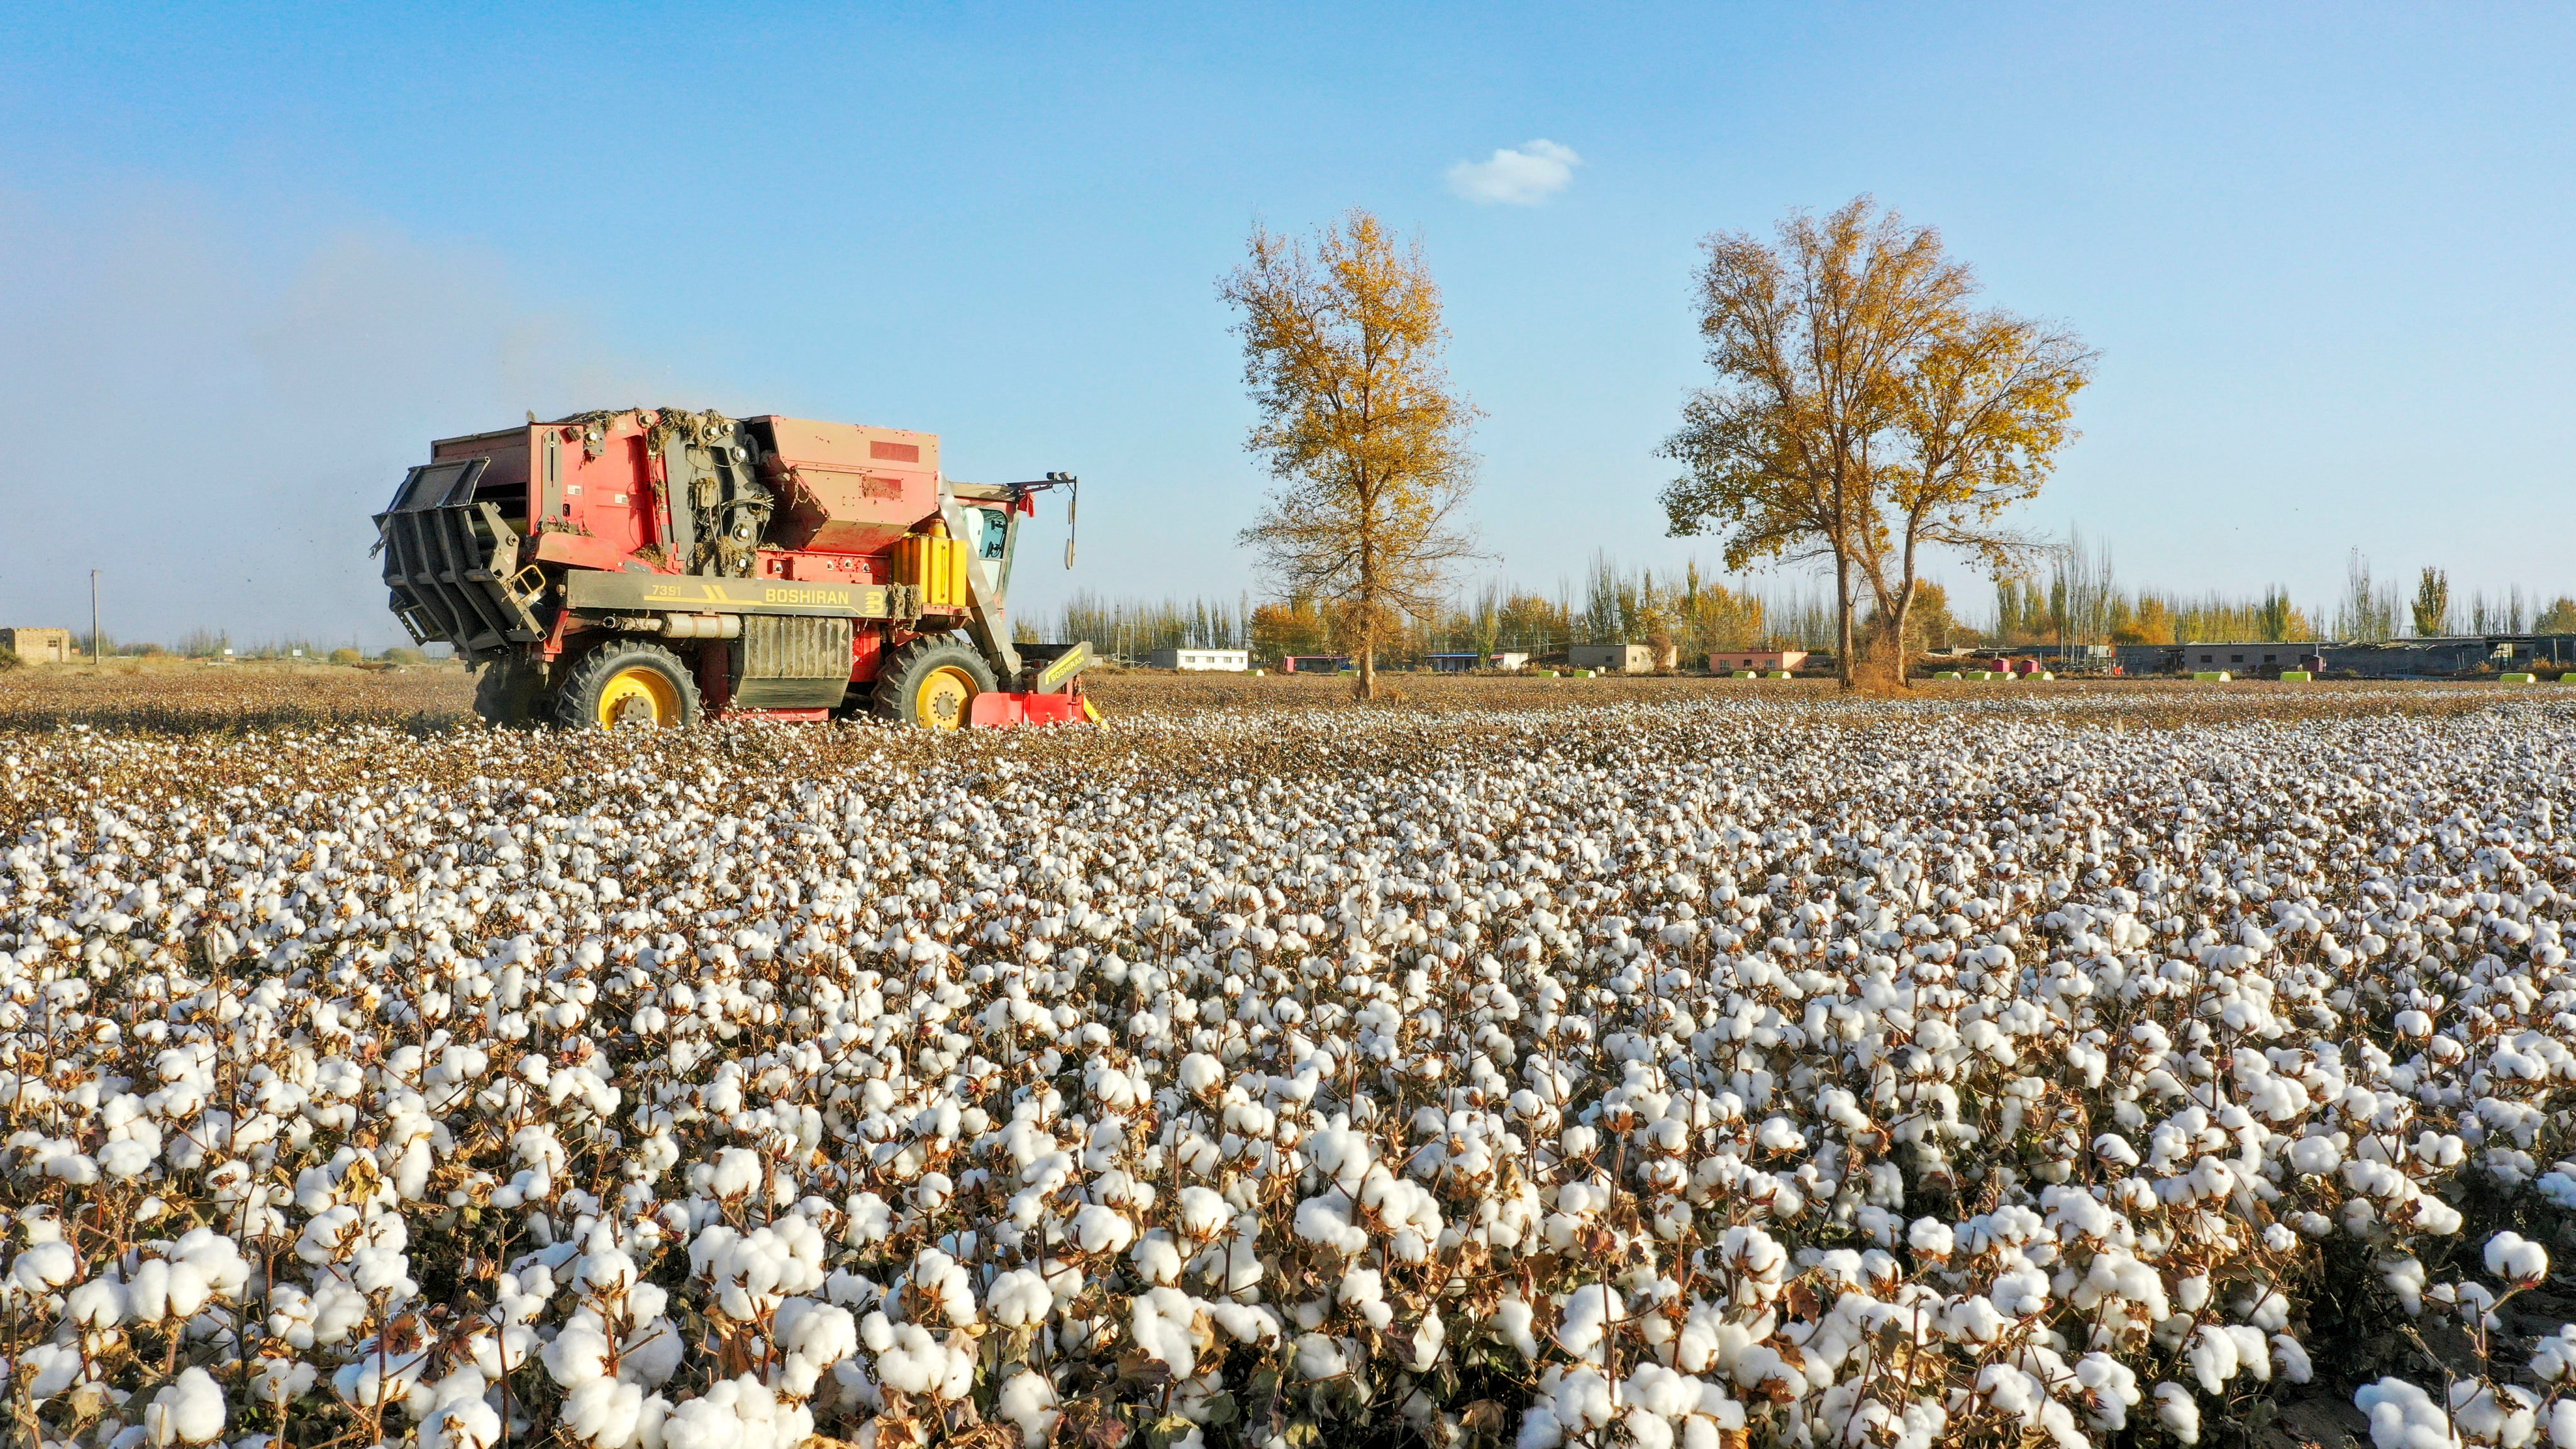 Total cotton production in China is expected to reach 6.138 million tonnes in 2022, with 5.634 million tonnes expected to be produced in Xinjiang. Photo: Xinhua